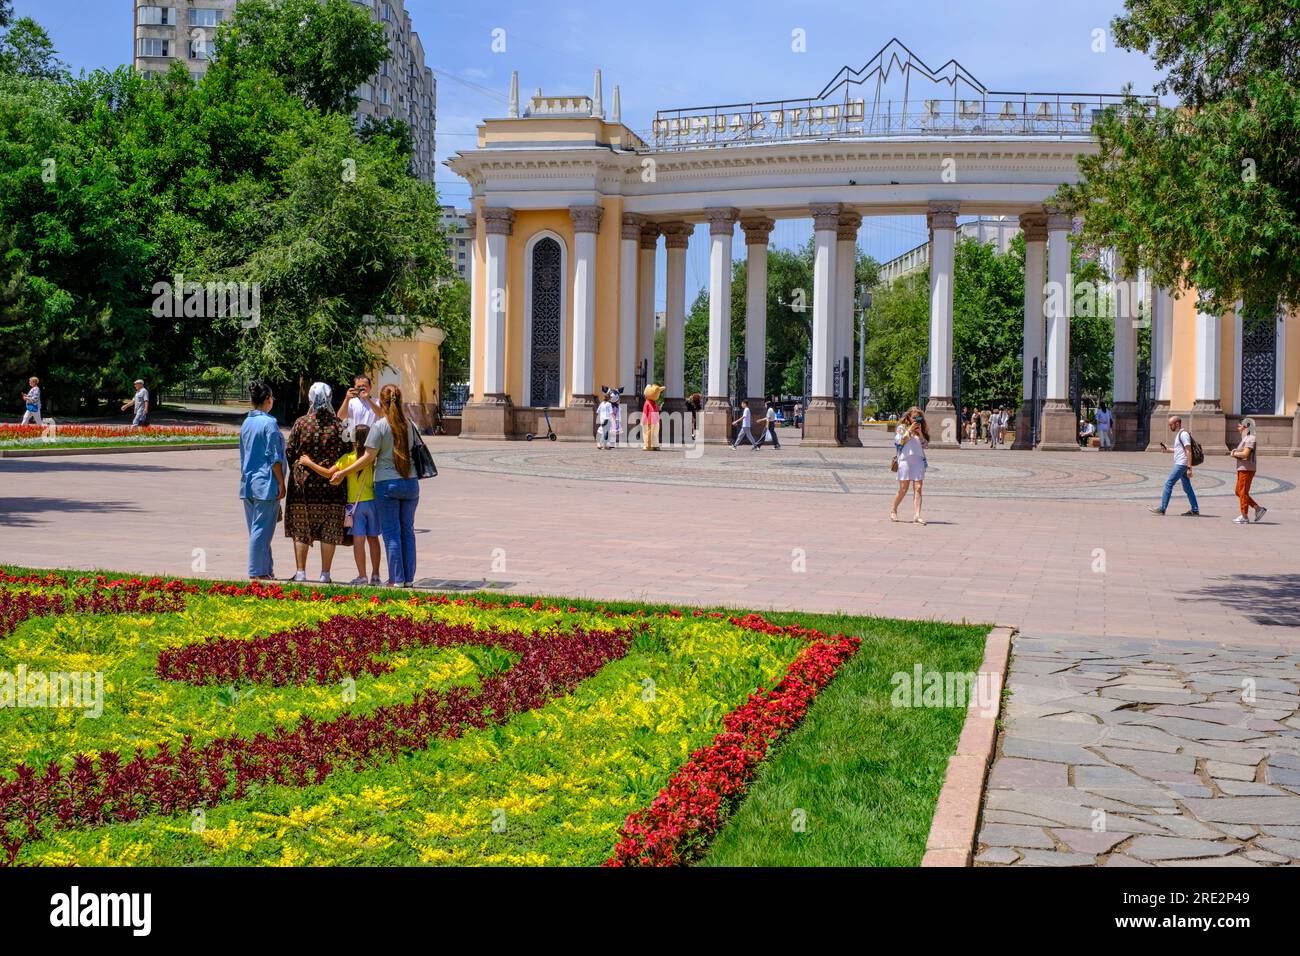 Kazakhstan, Almaty. Family Posing for a Photo at Entrance to Central Park for Culture and Recreation. Stock Photo